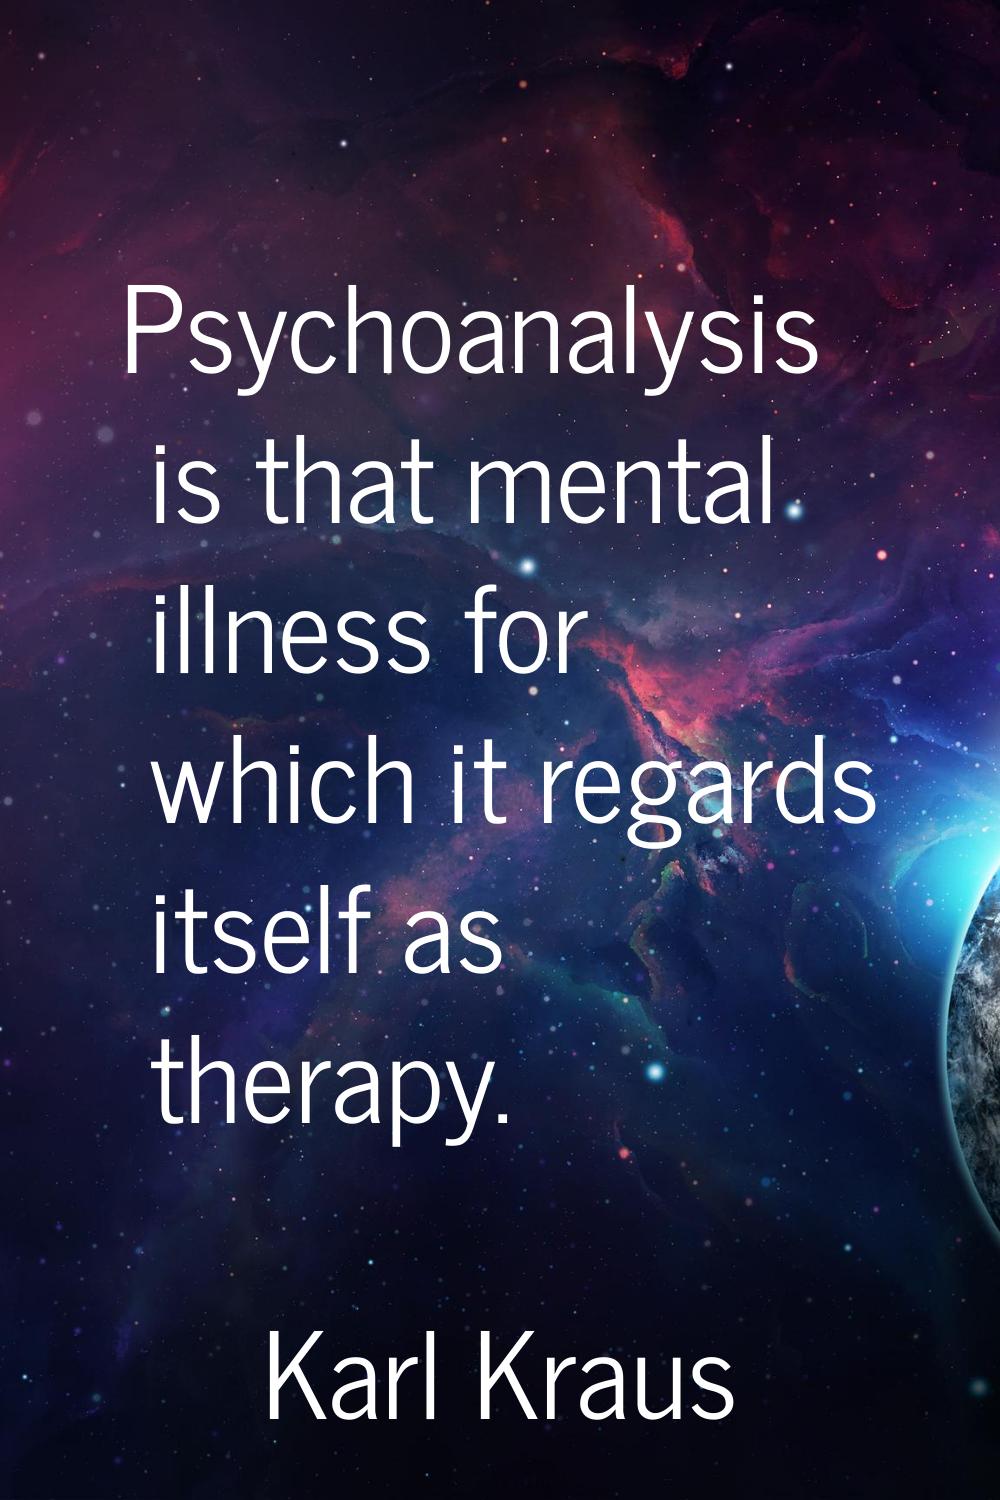 Psychoanalysis is that mental illness for which it regards itself as therapy.